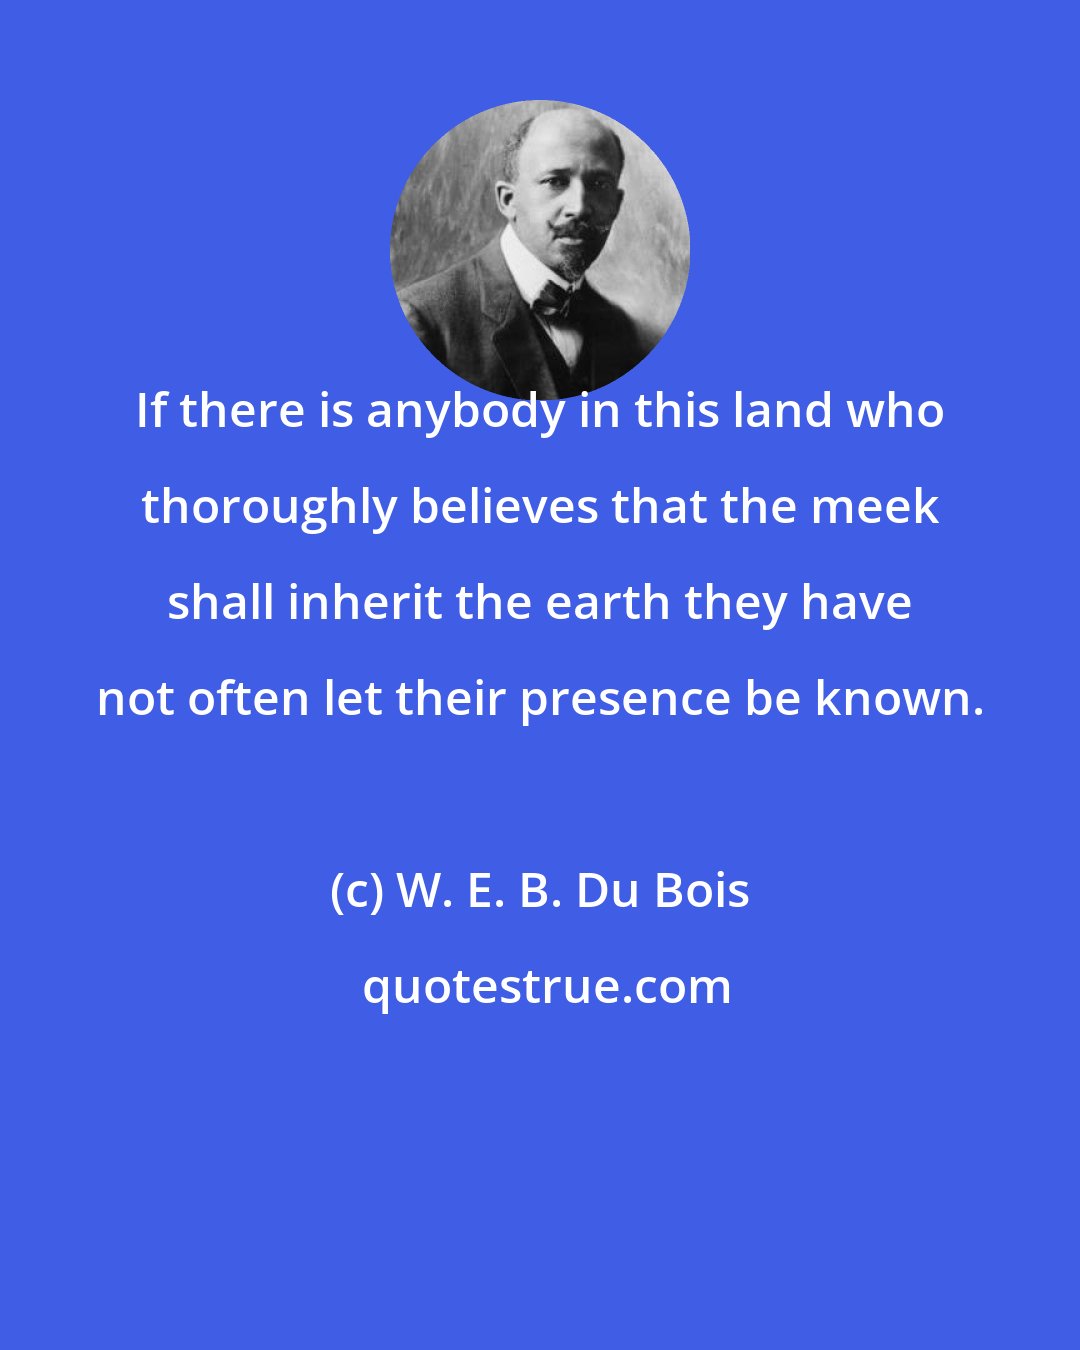 W. E. B. Du Bois: If there is anybody in this land who thoroughly believes that the meek shall inherit the earth they have not often let their presence be known.